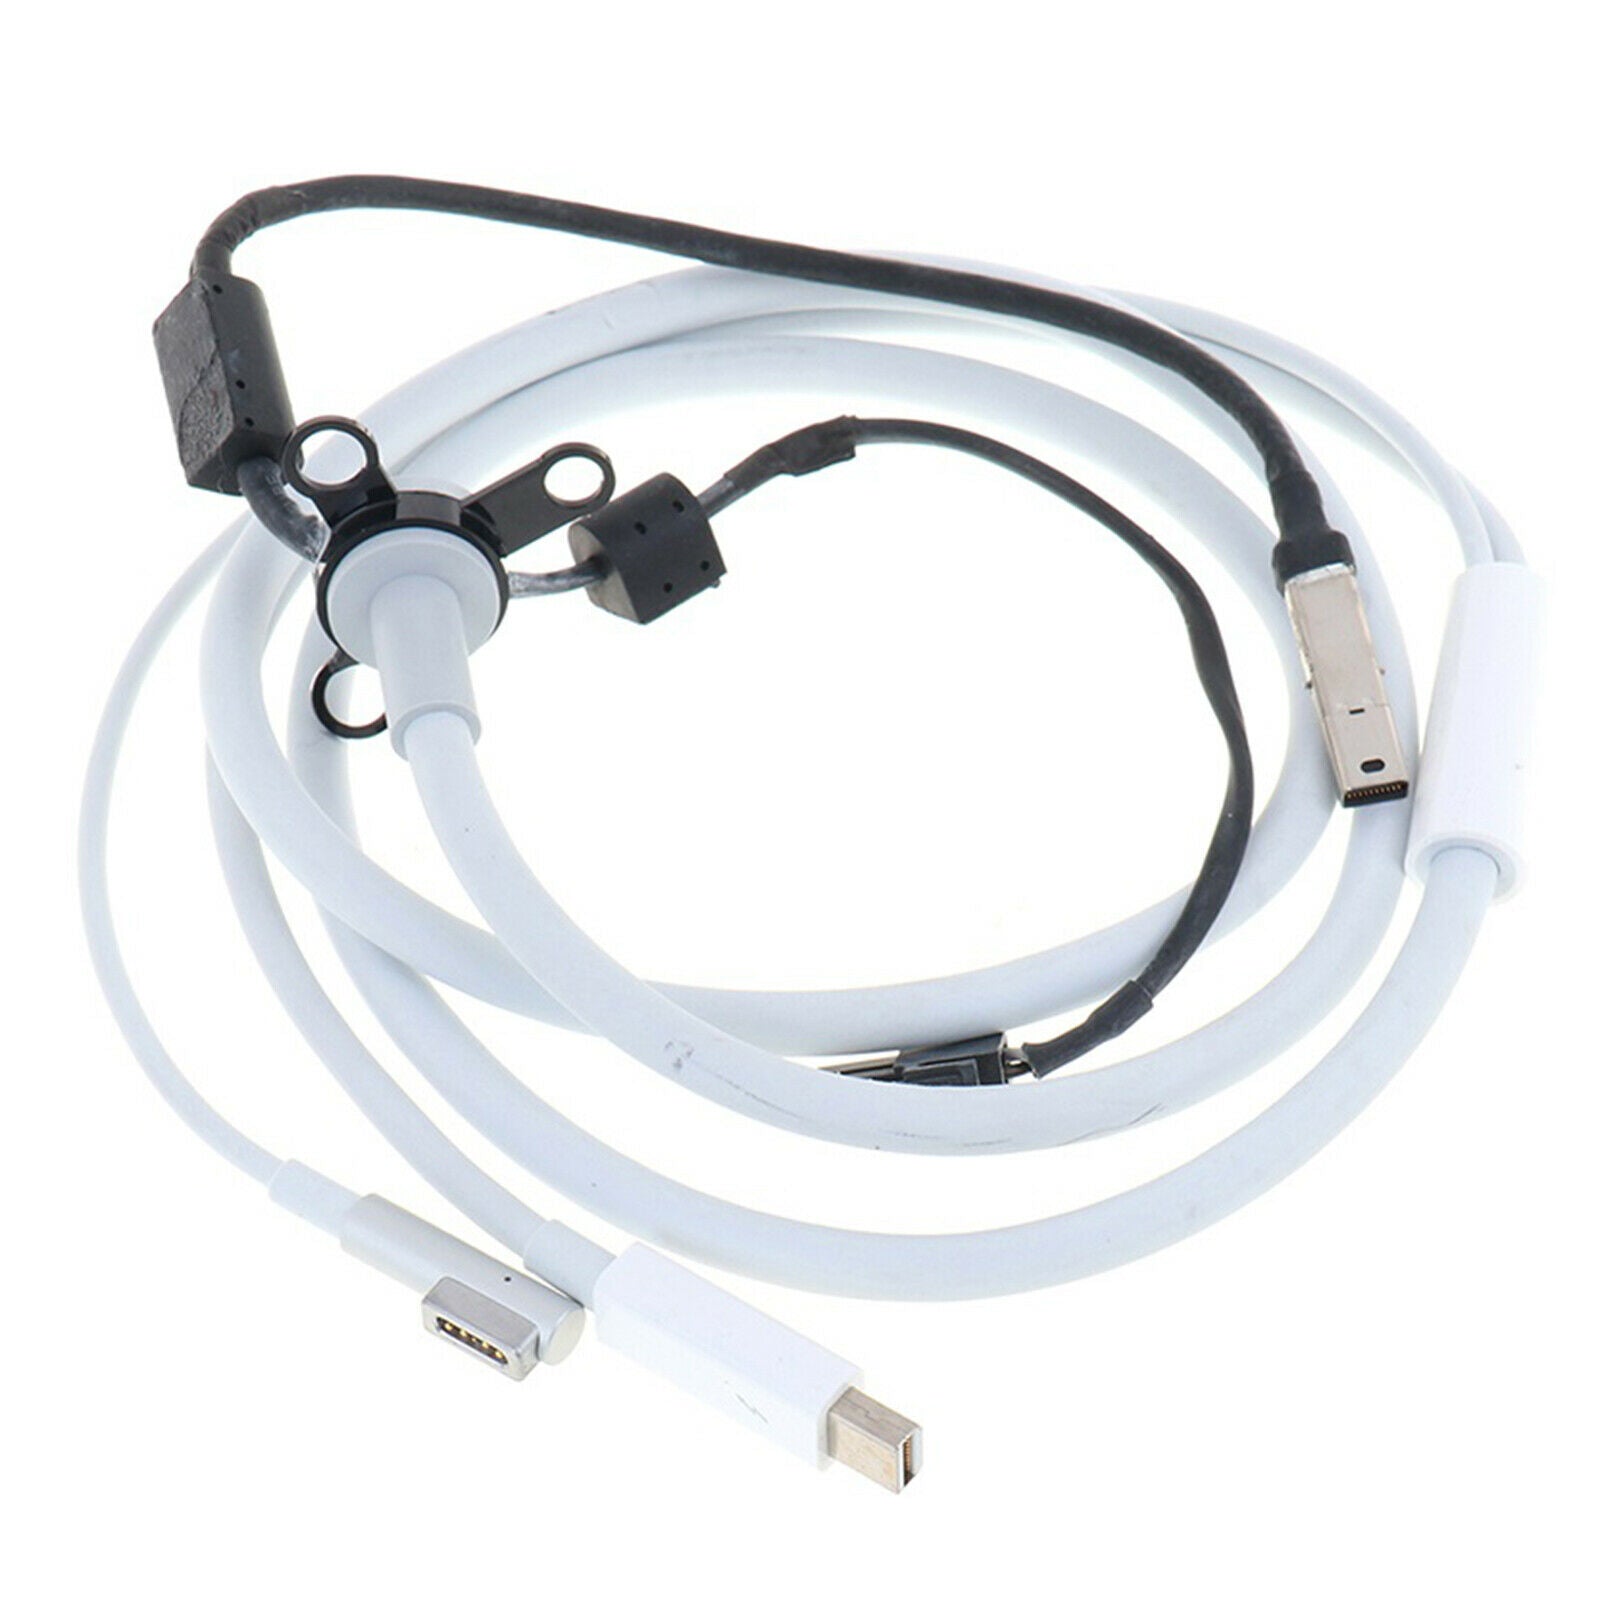 1 PcsAll-In-One For Thunderbolt Cinema display Cable 922-9941 2-240-0768.